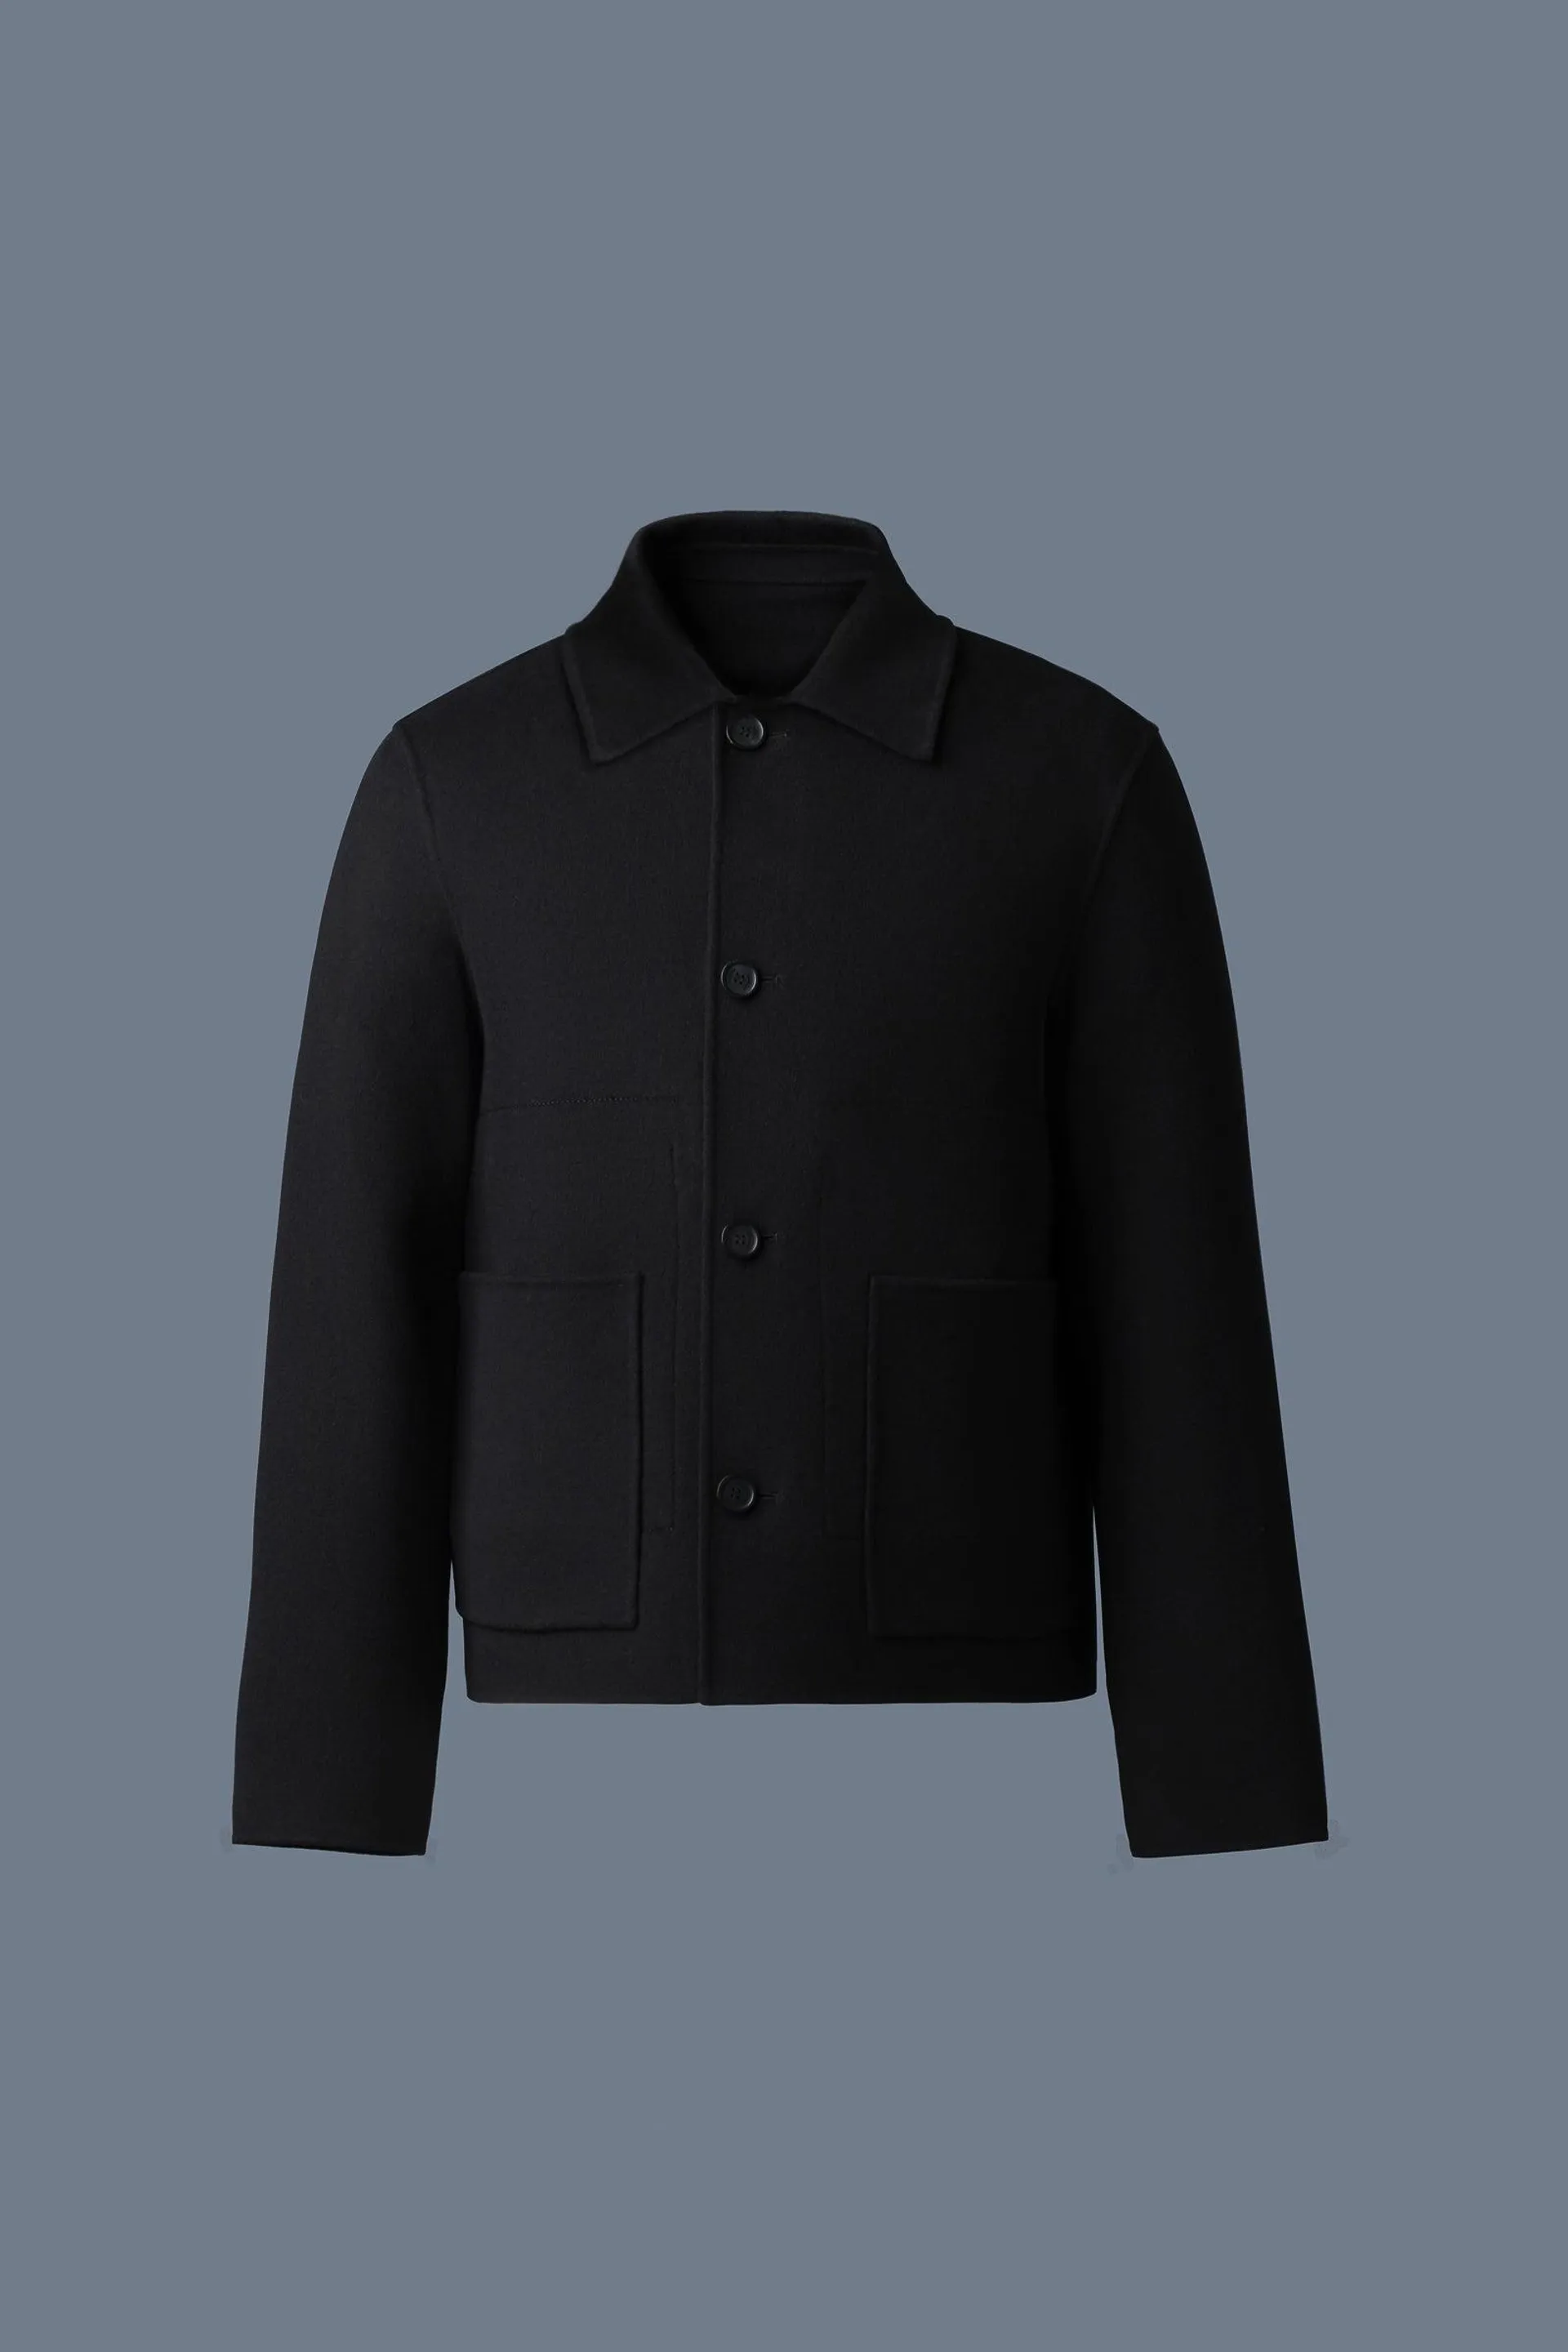 ANDERS 2-in-1 Reversible Double-Face Wool Jacket